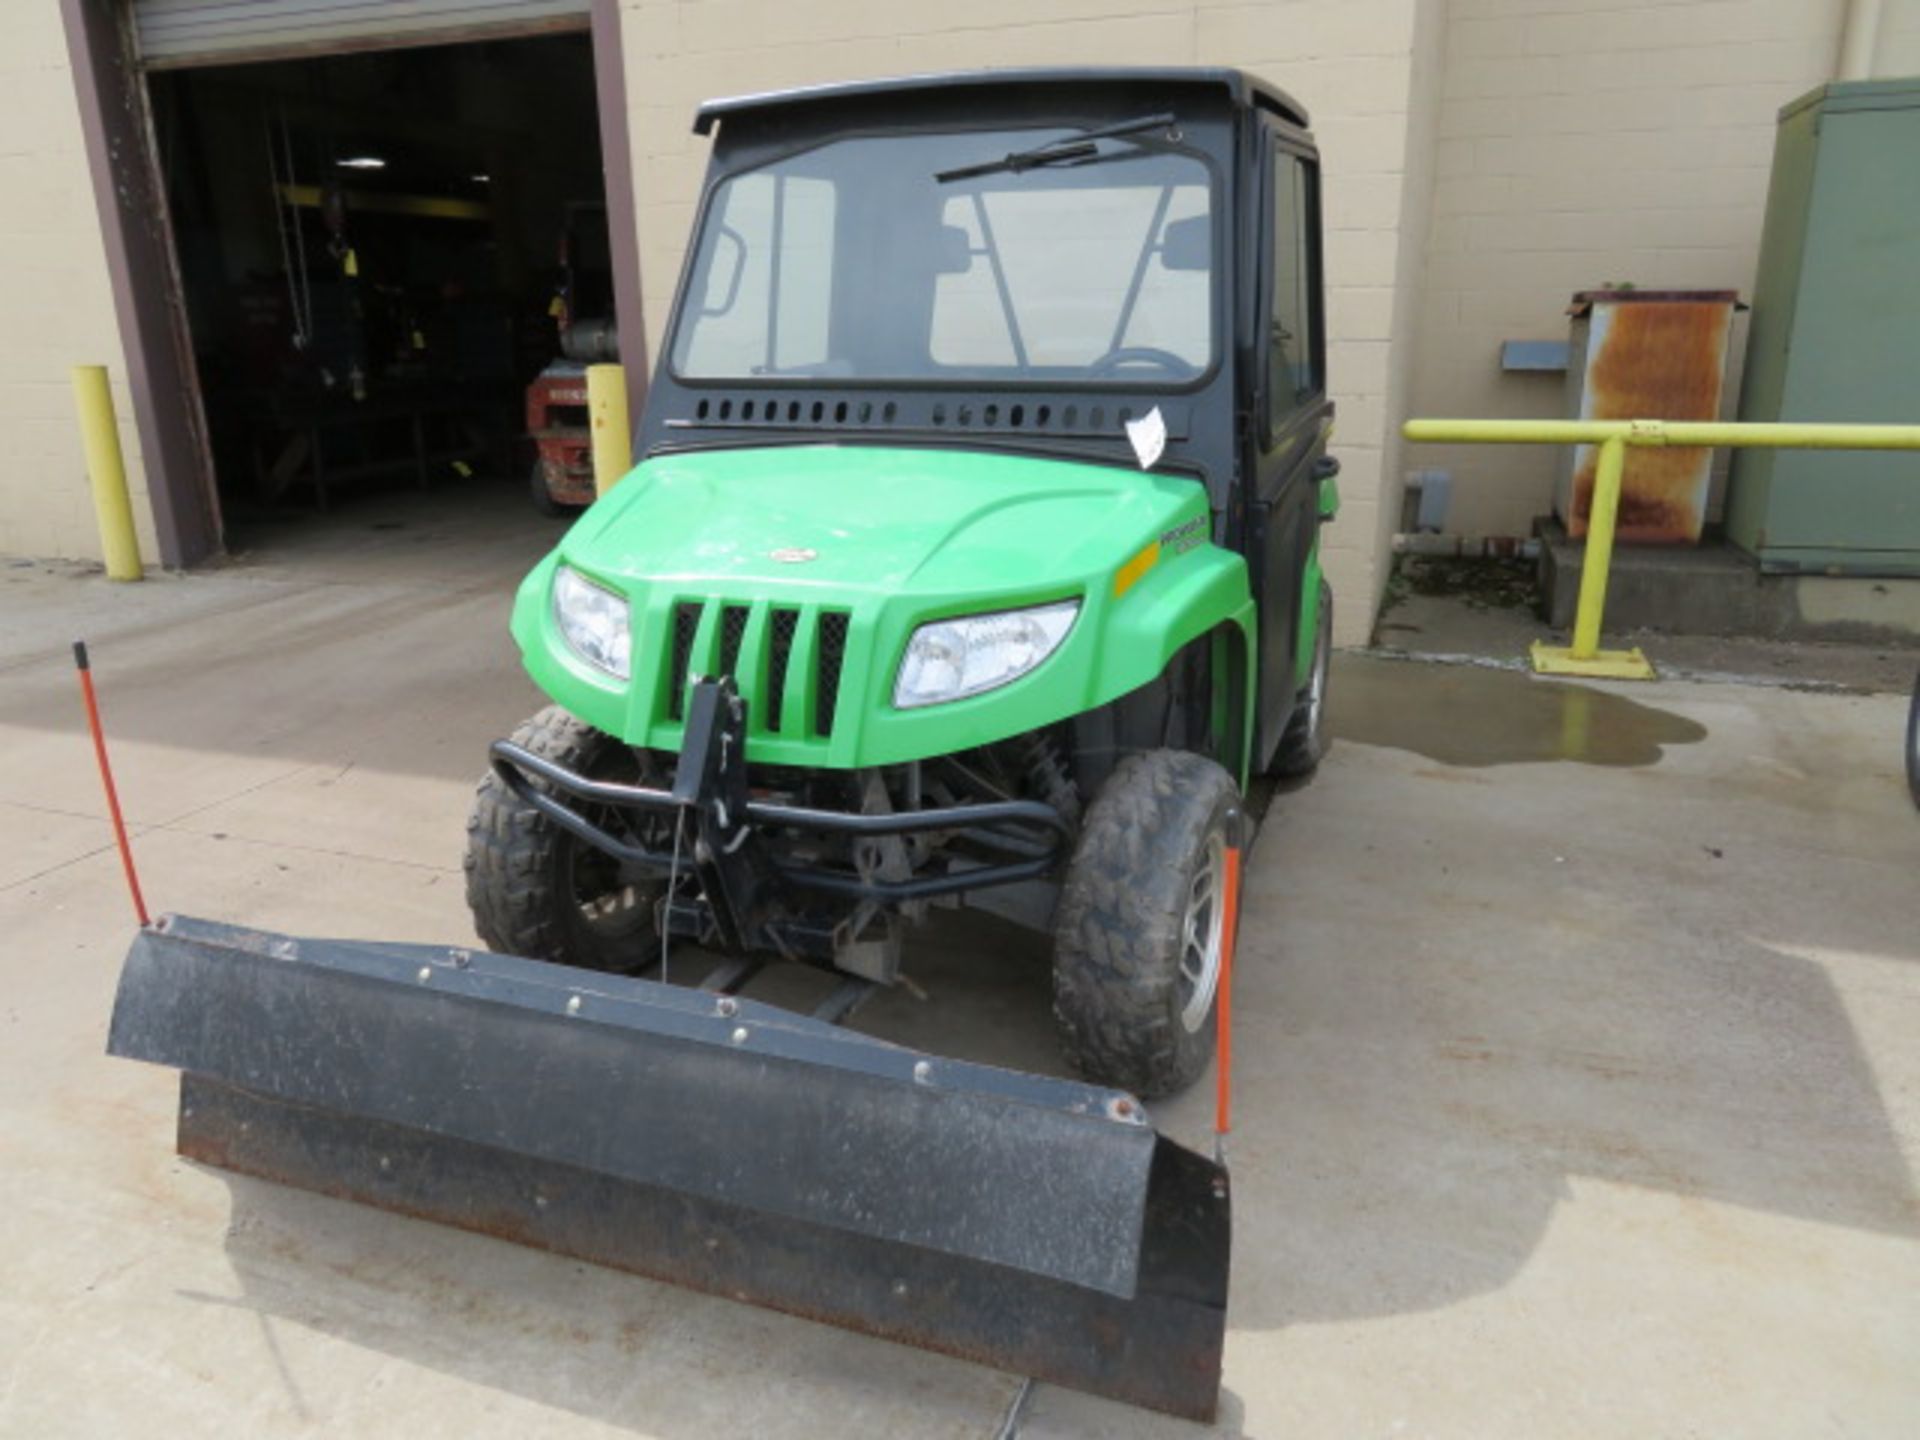 2009 ARCTIC CAT PROWLER XT 650 W/ CURTIS SNOW PLOW W/ CONTROL, ENCLOSED CAB & POLY PICK UP BED